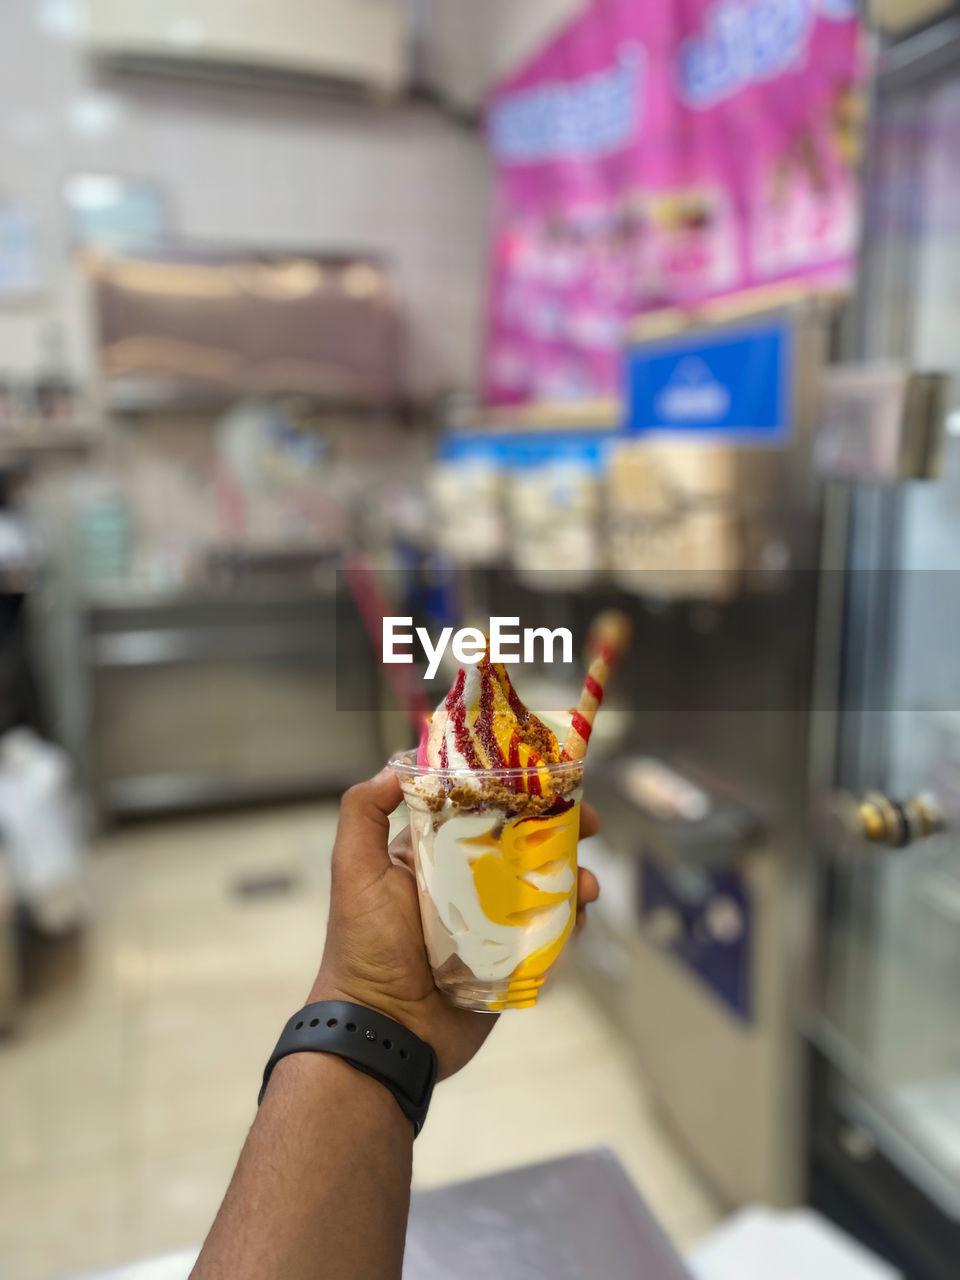 cropped hand of person holding ice cream cone